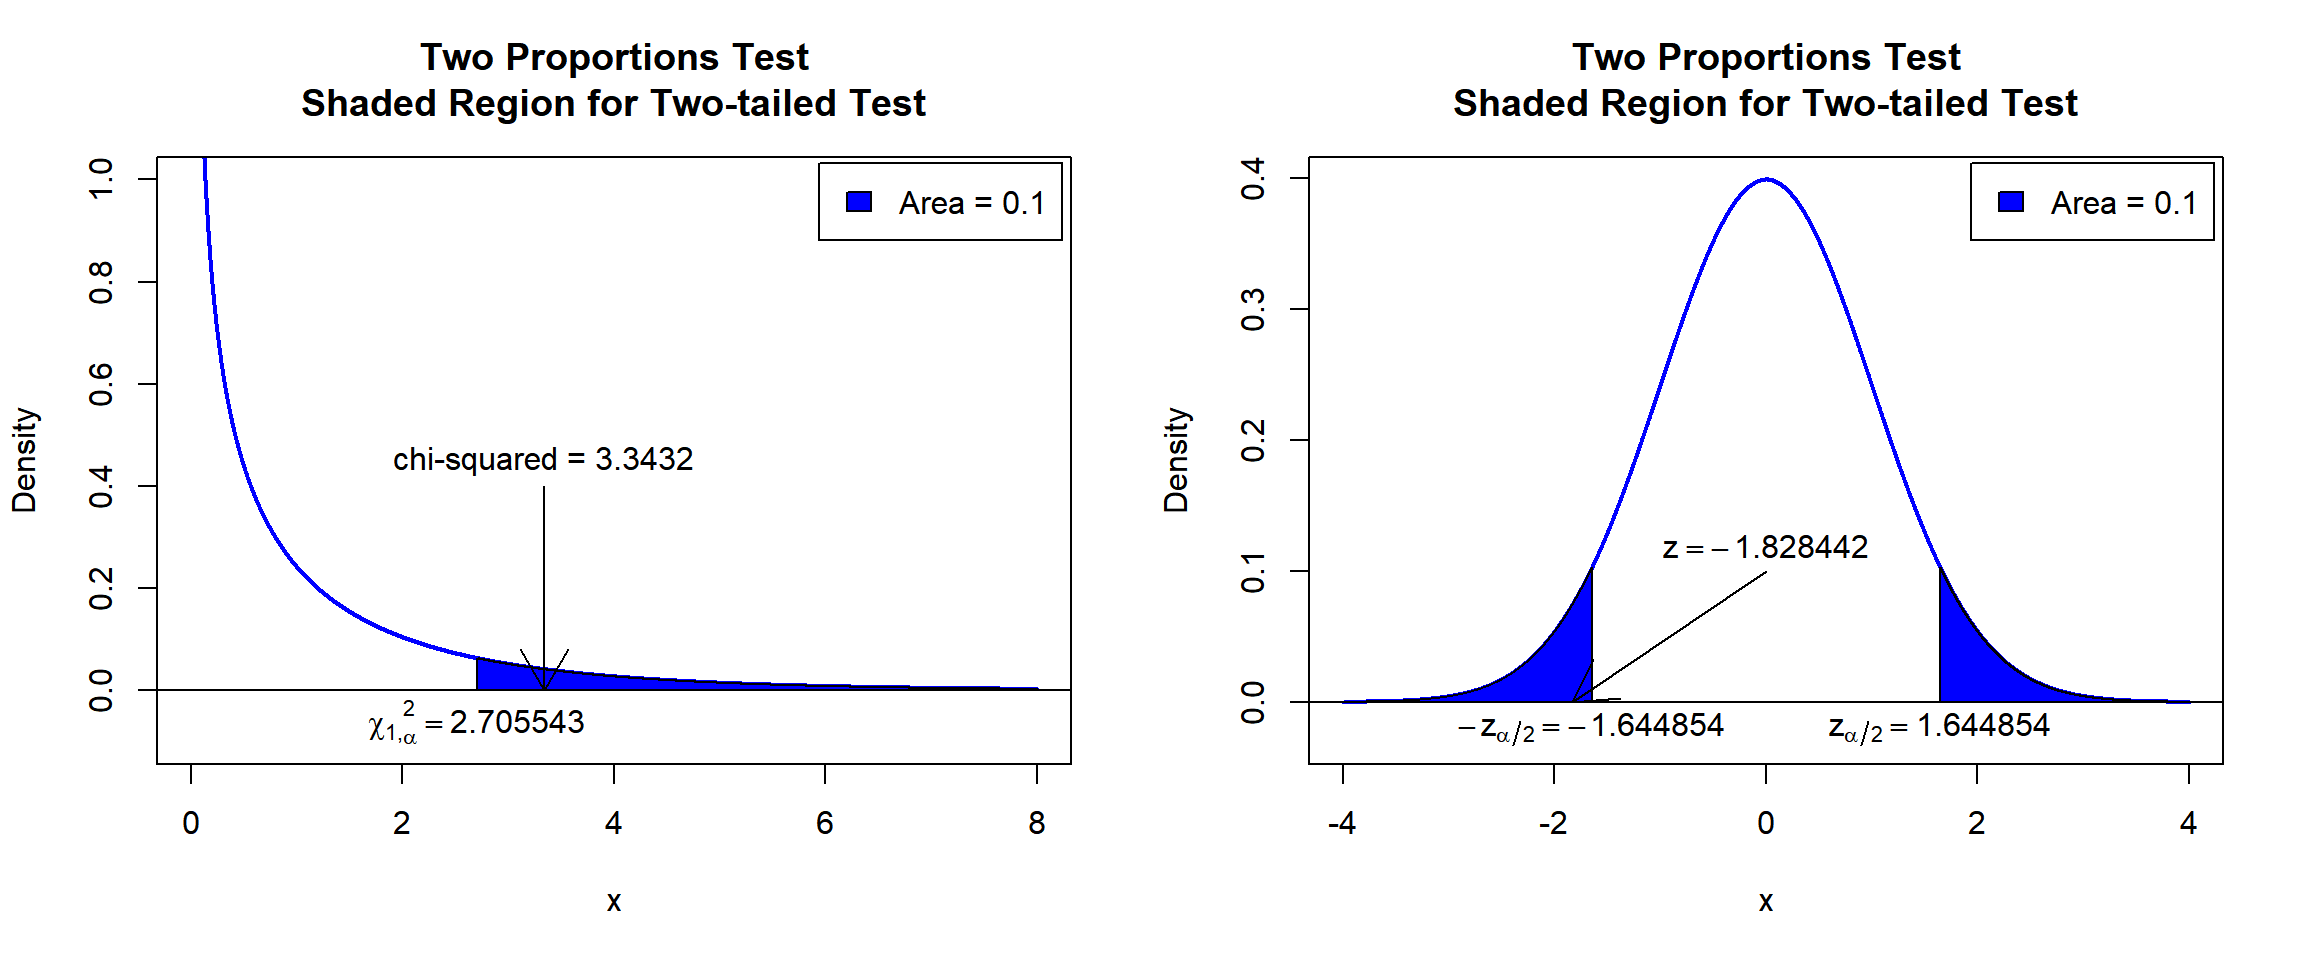 Two Proportions Test Shaded Region for Two-tailed Test in R